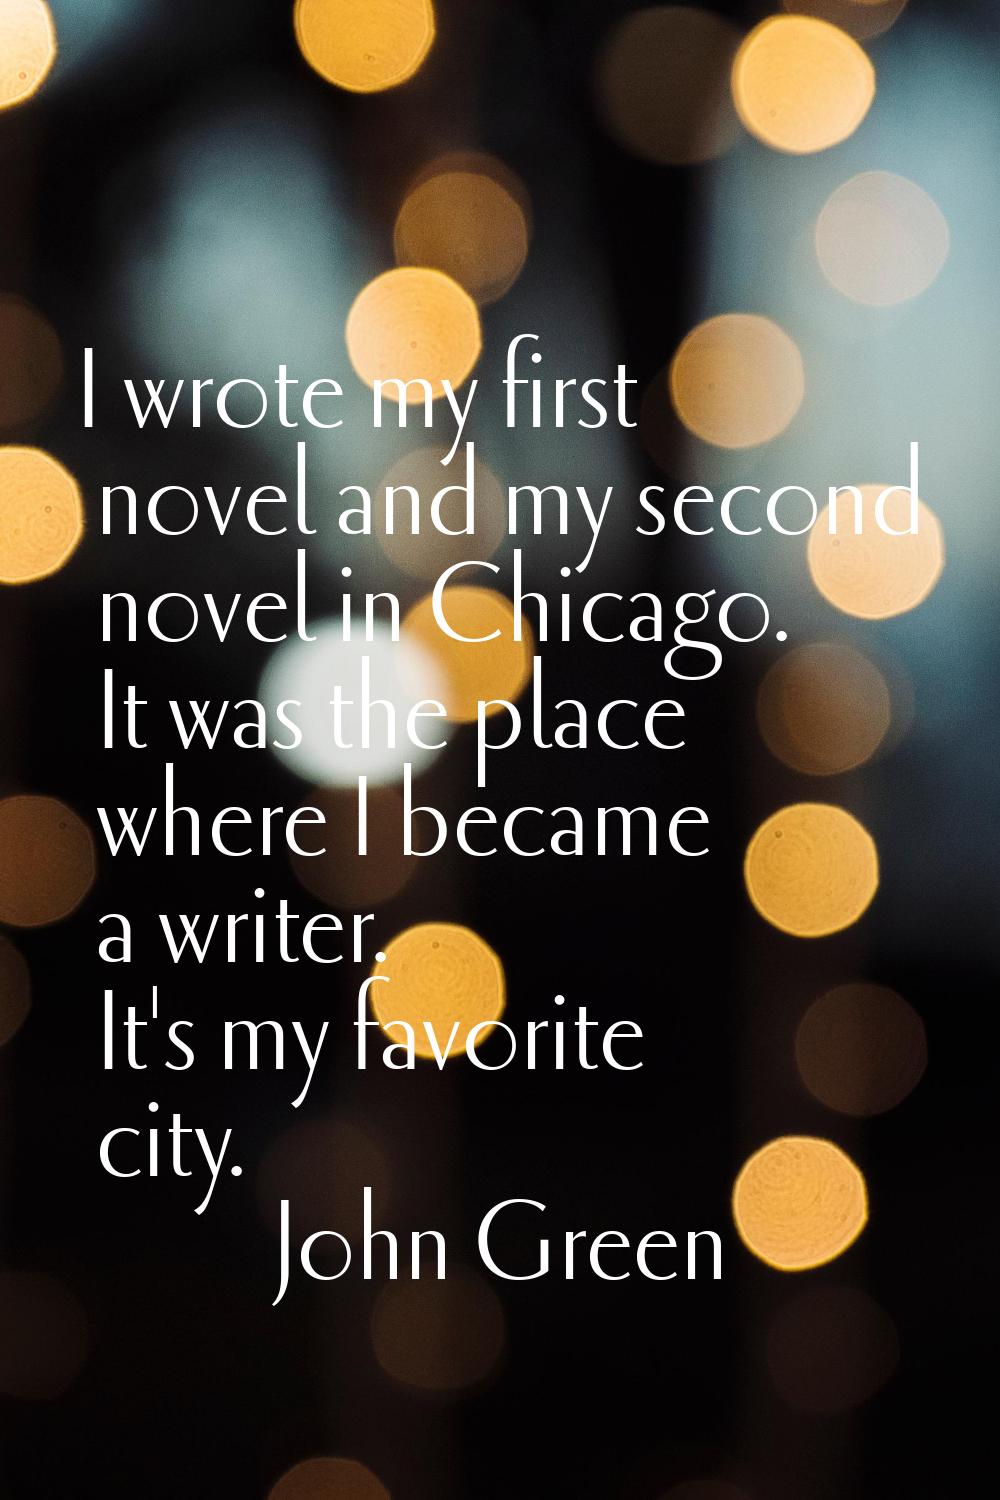 I wrote my first novel and my second novel in Chicago. It was the place where I became a writer. It